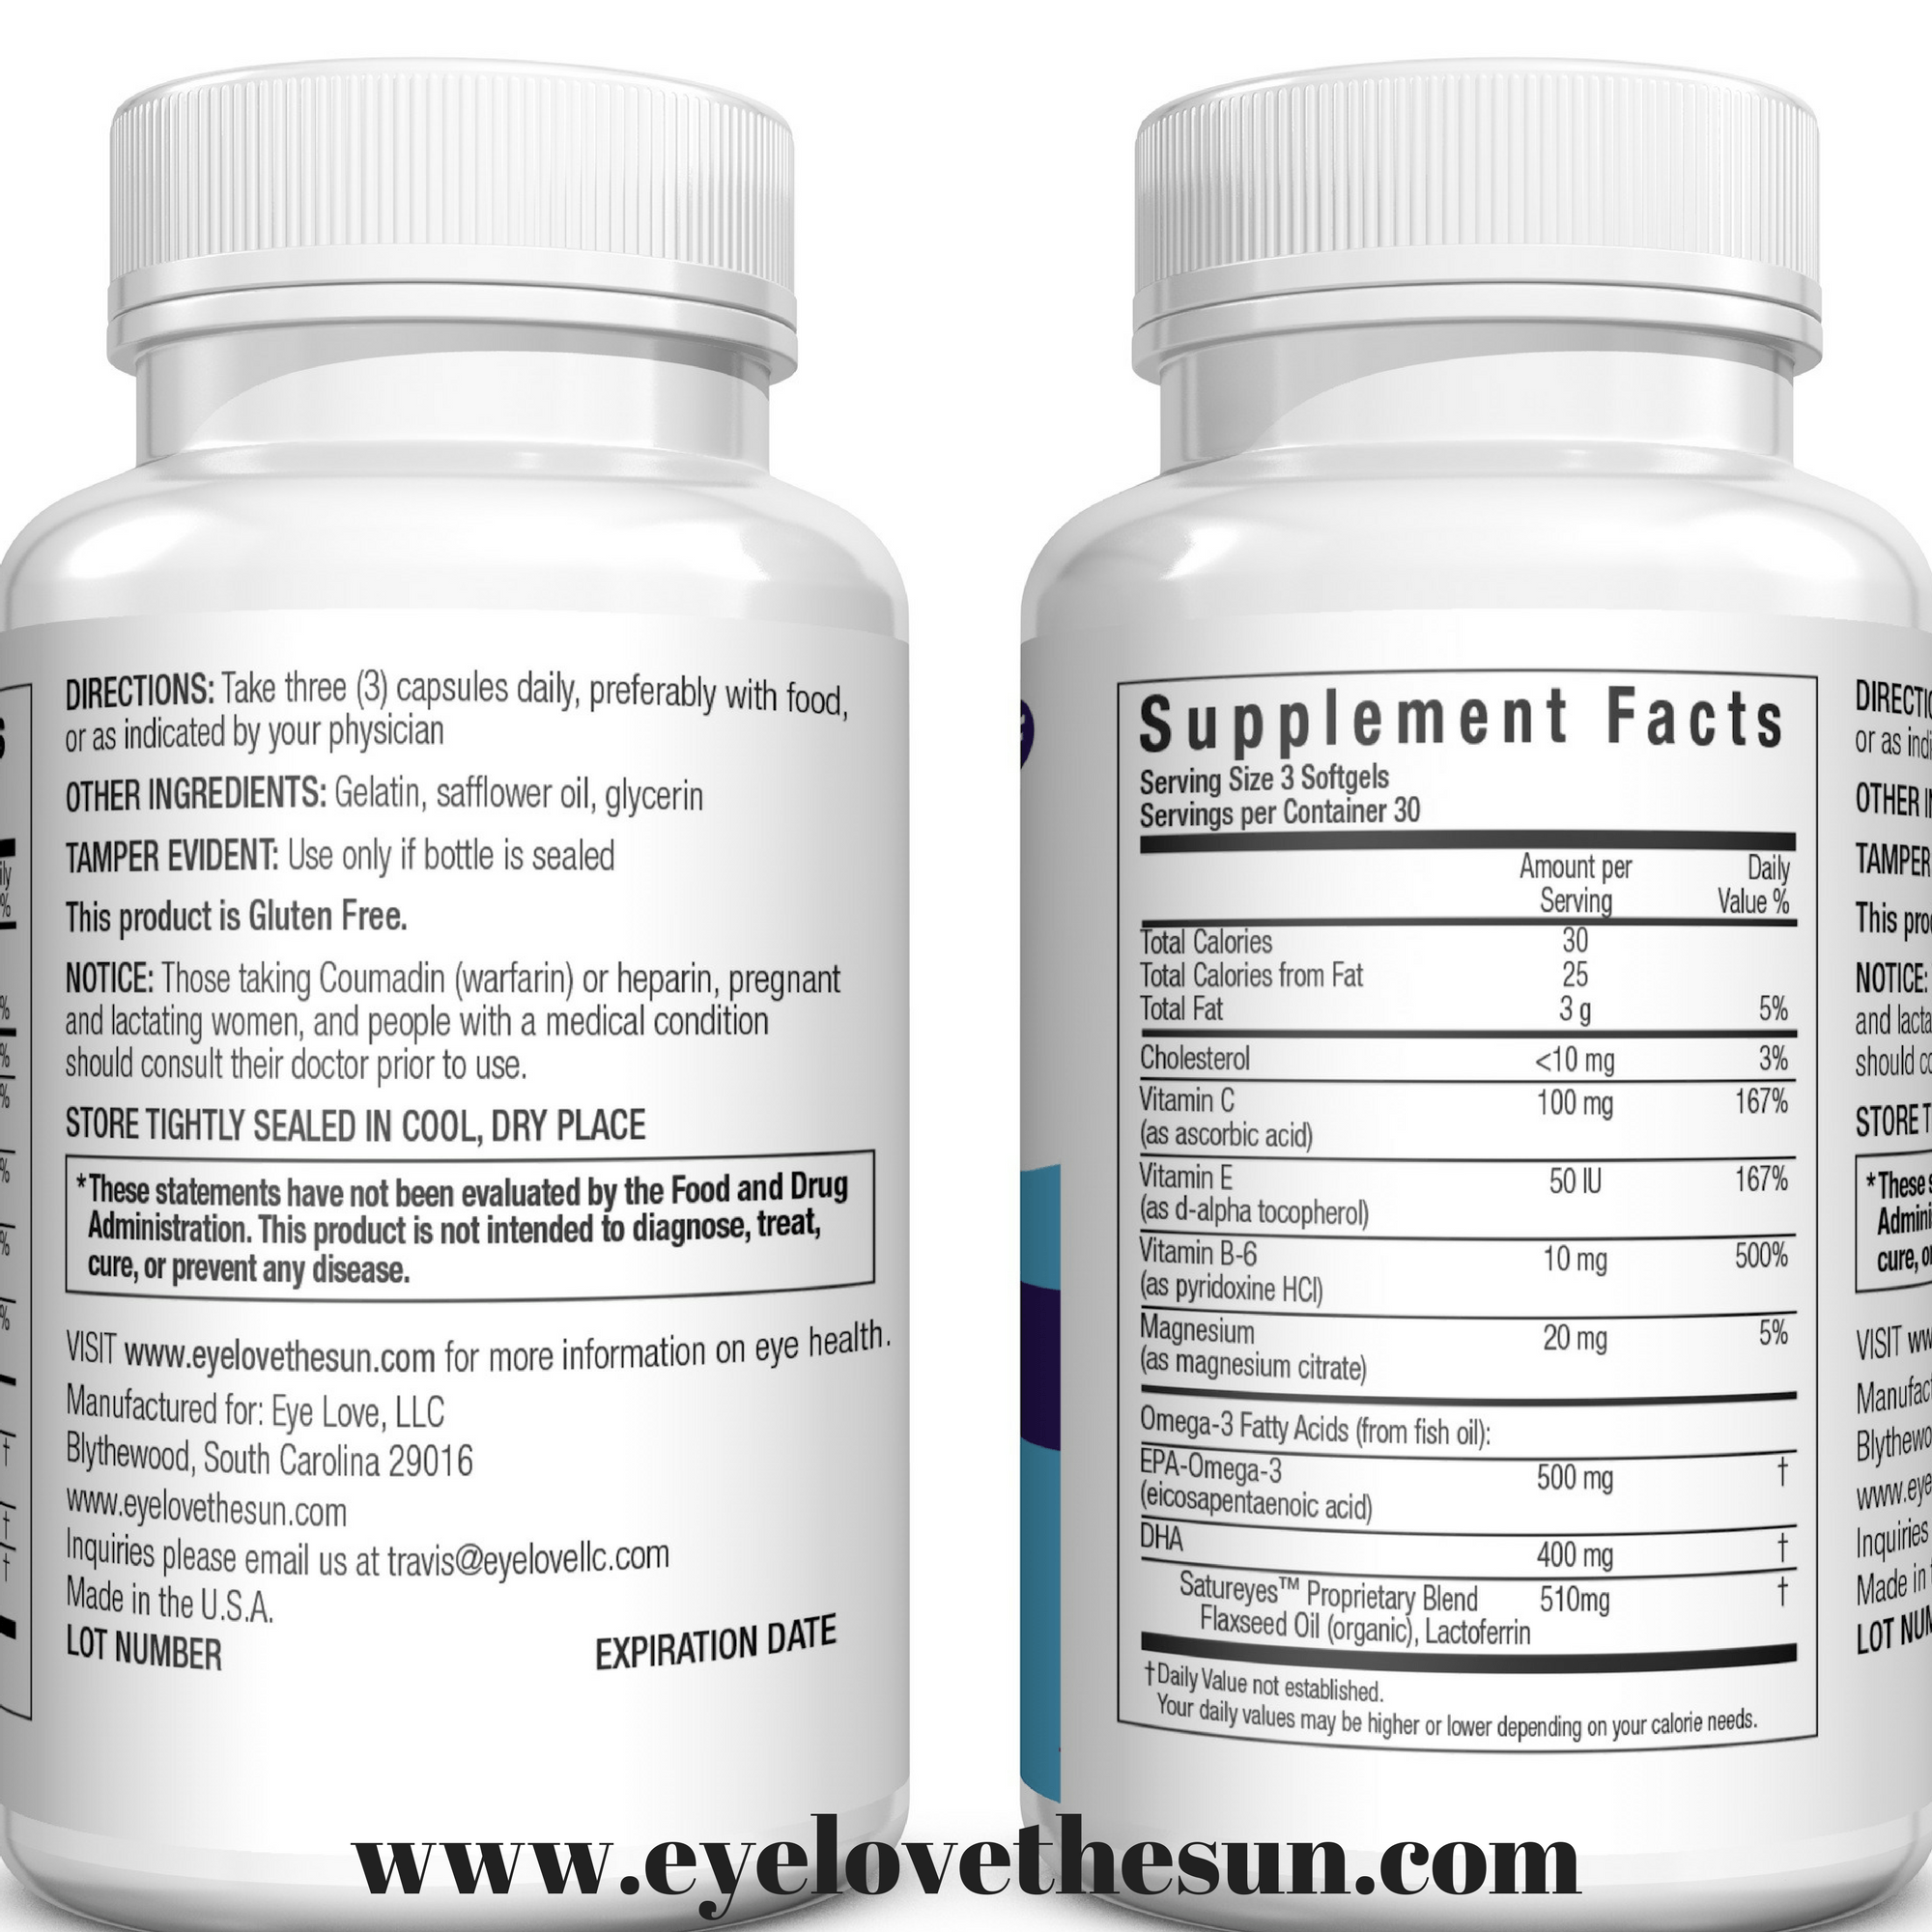 Different Types/Forms of Fish Oil Available